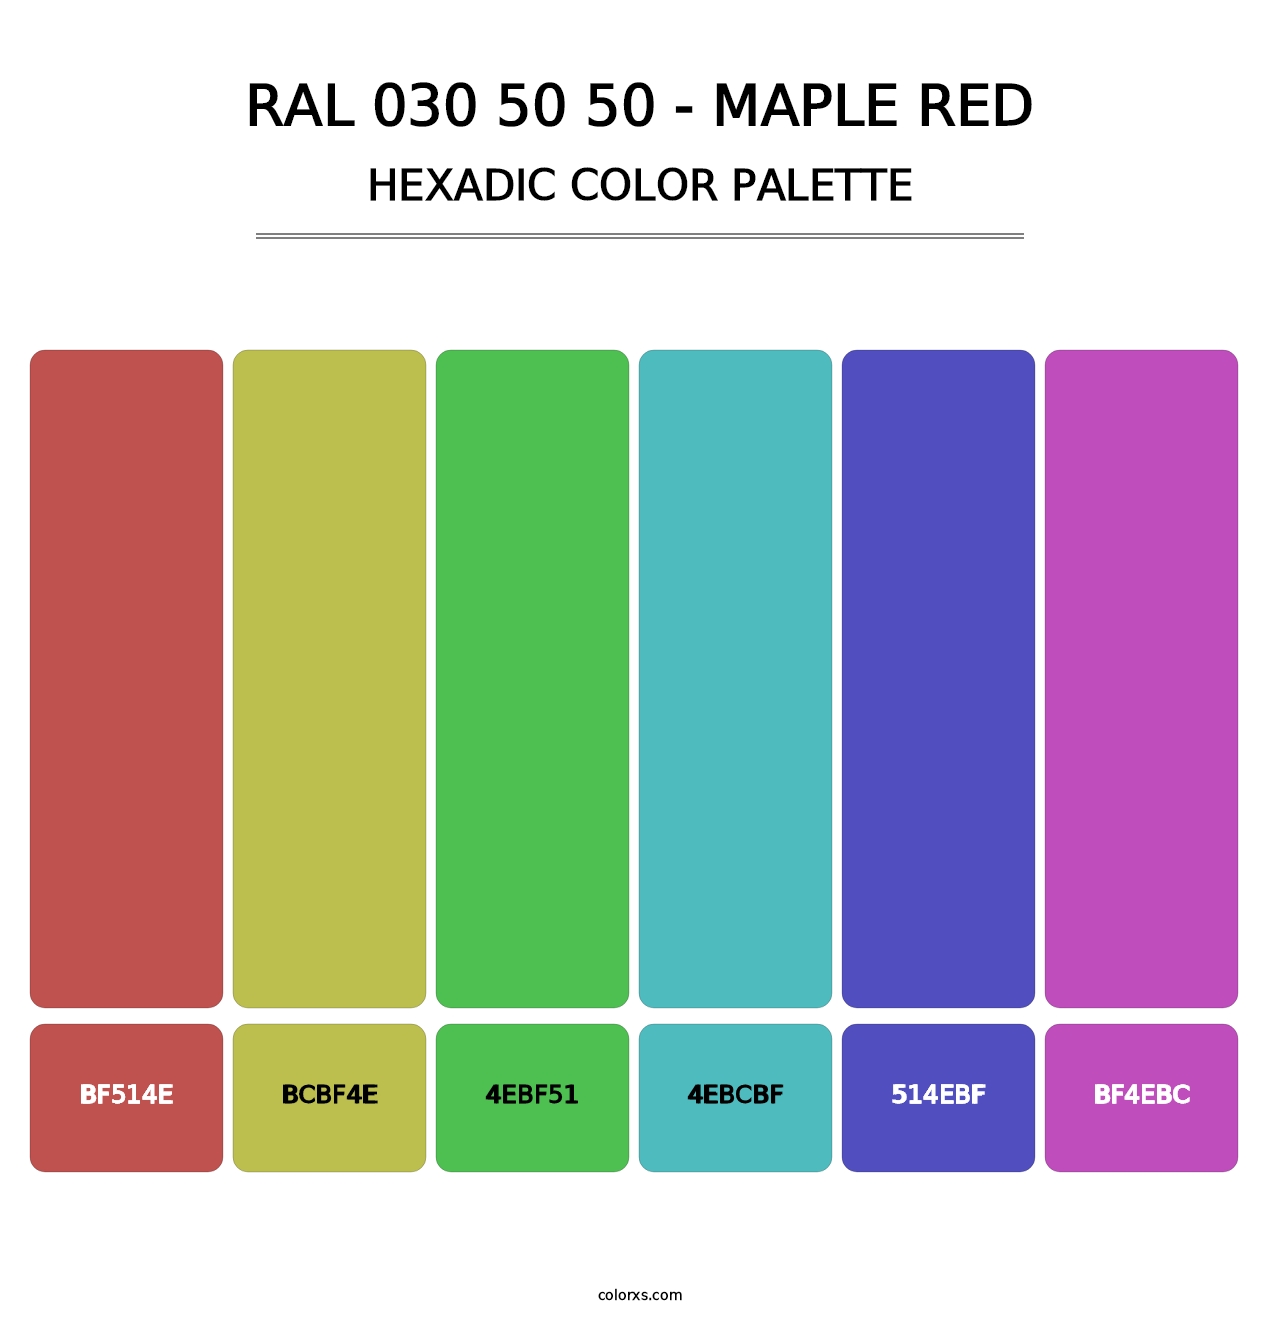 RAL 030 50 50 - Maple Red - Hexadic Color Palette